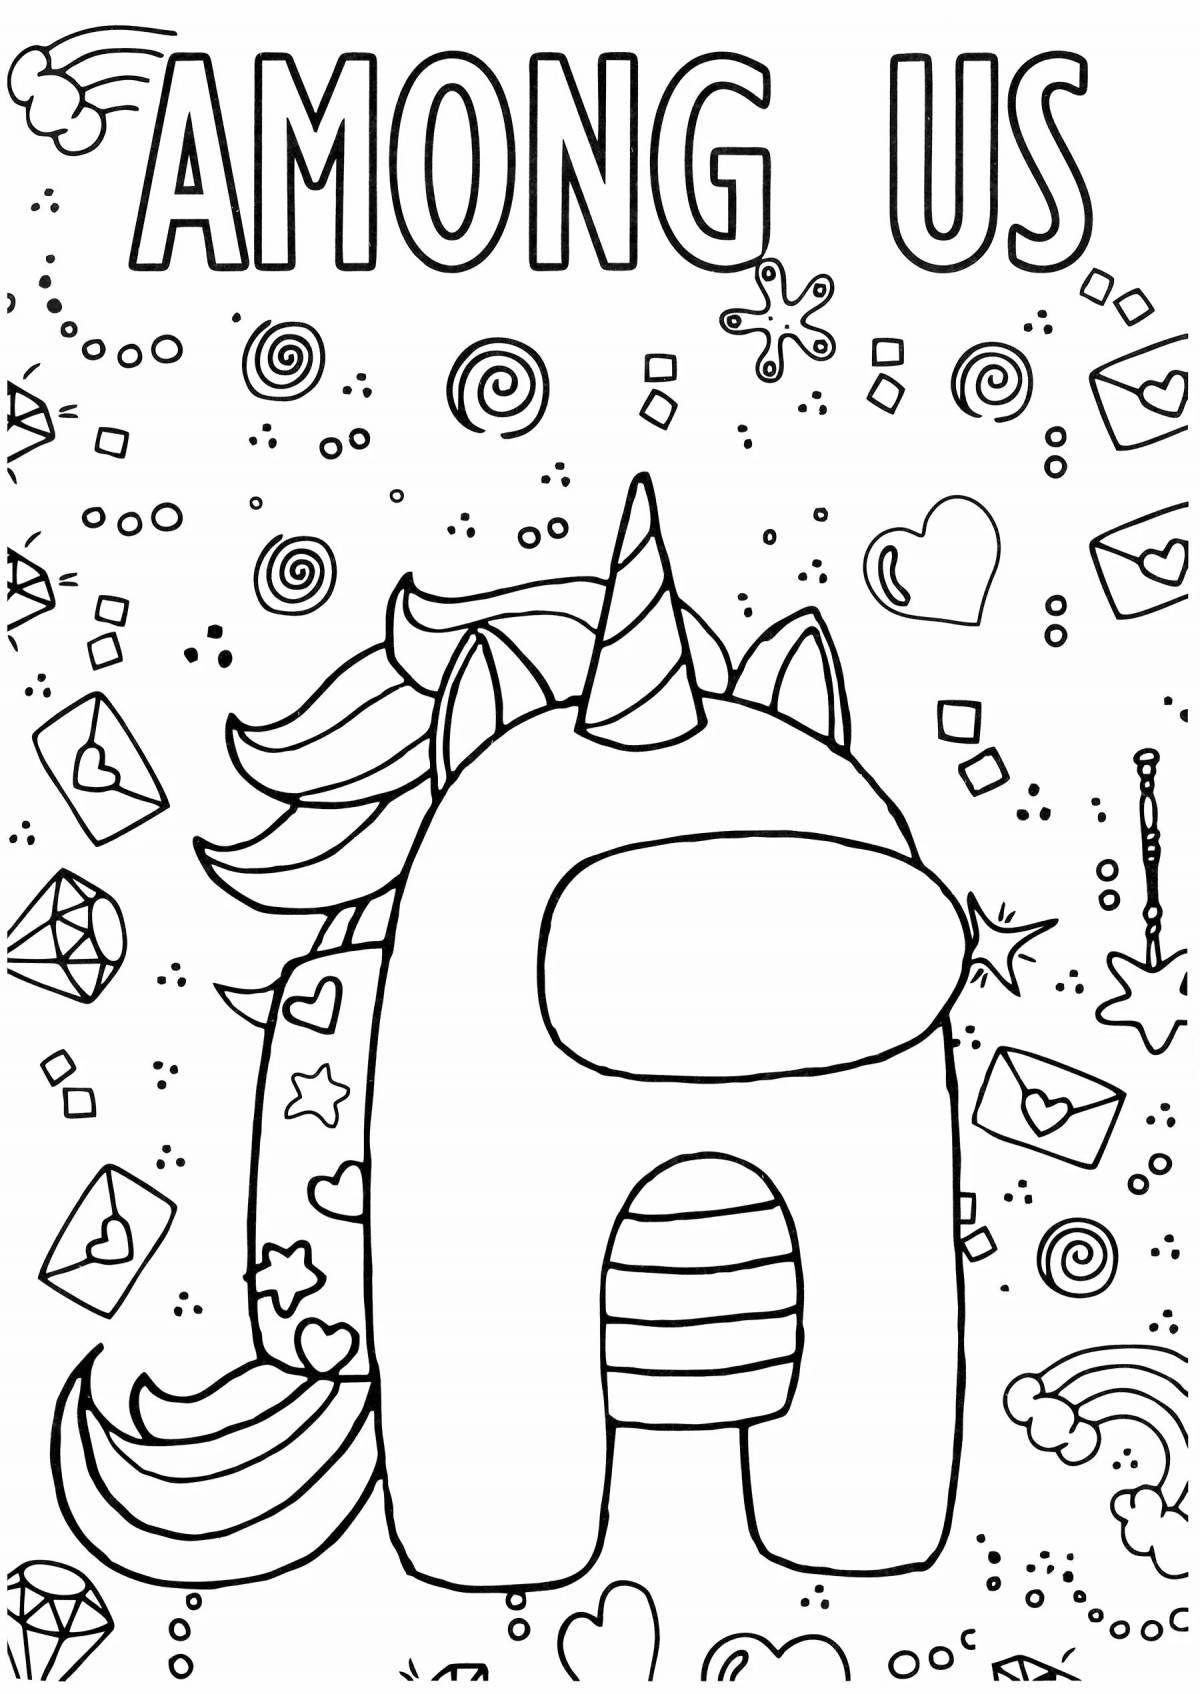 Color-lively among us cards coloring page